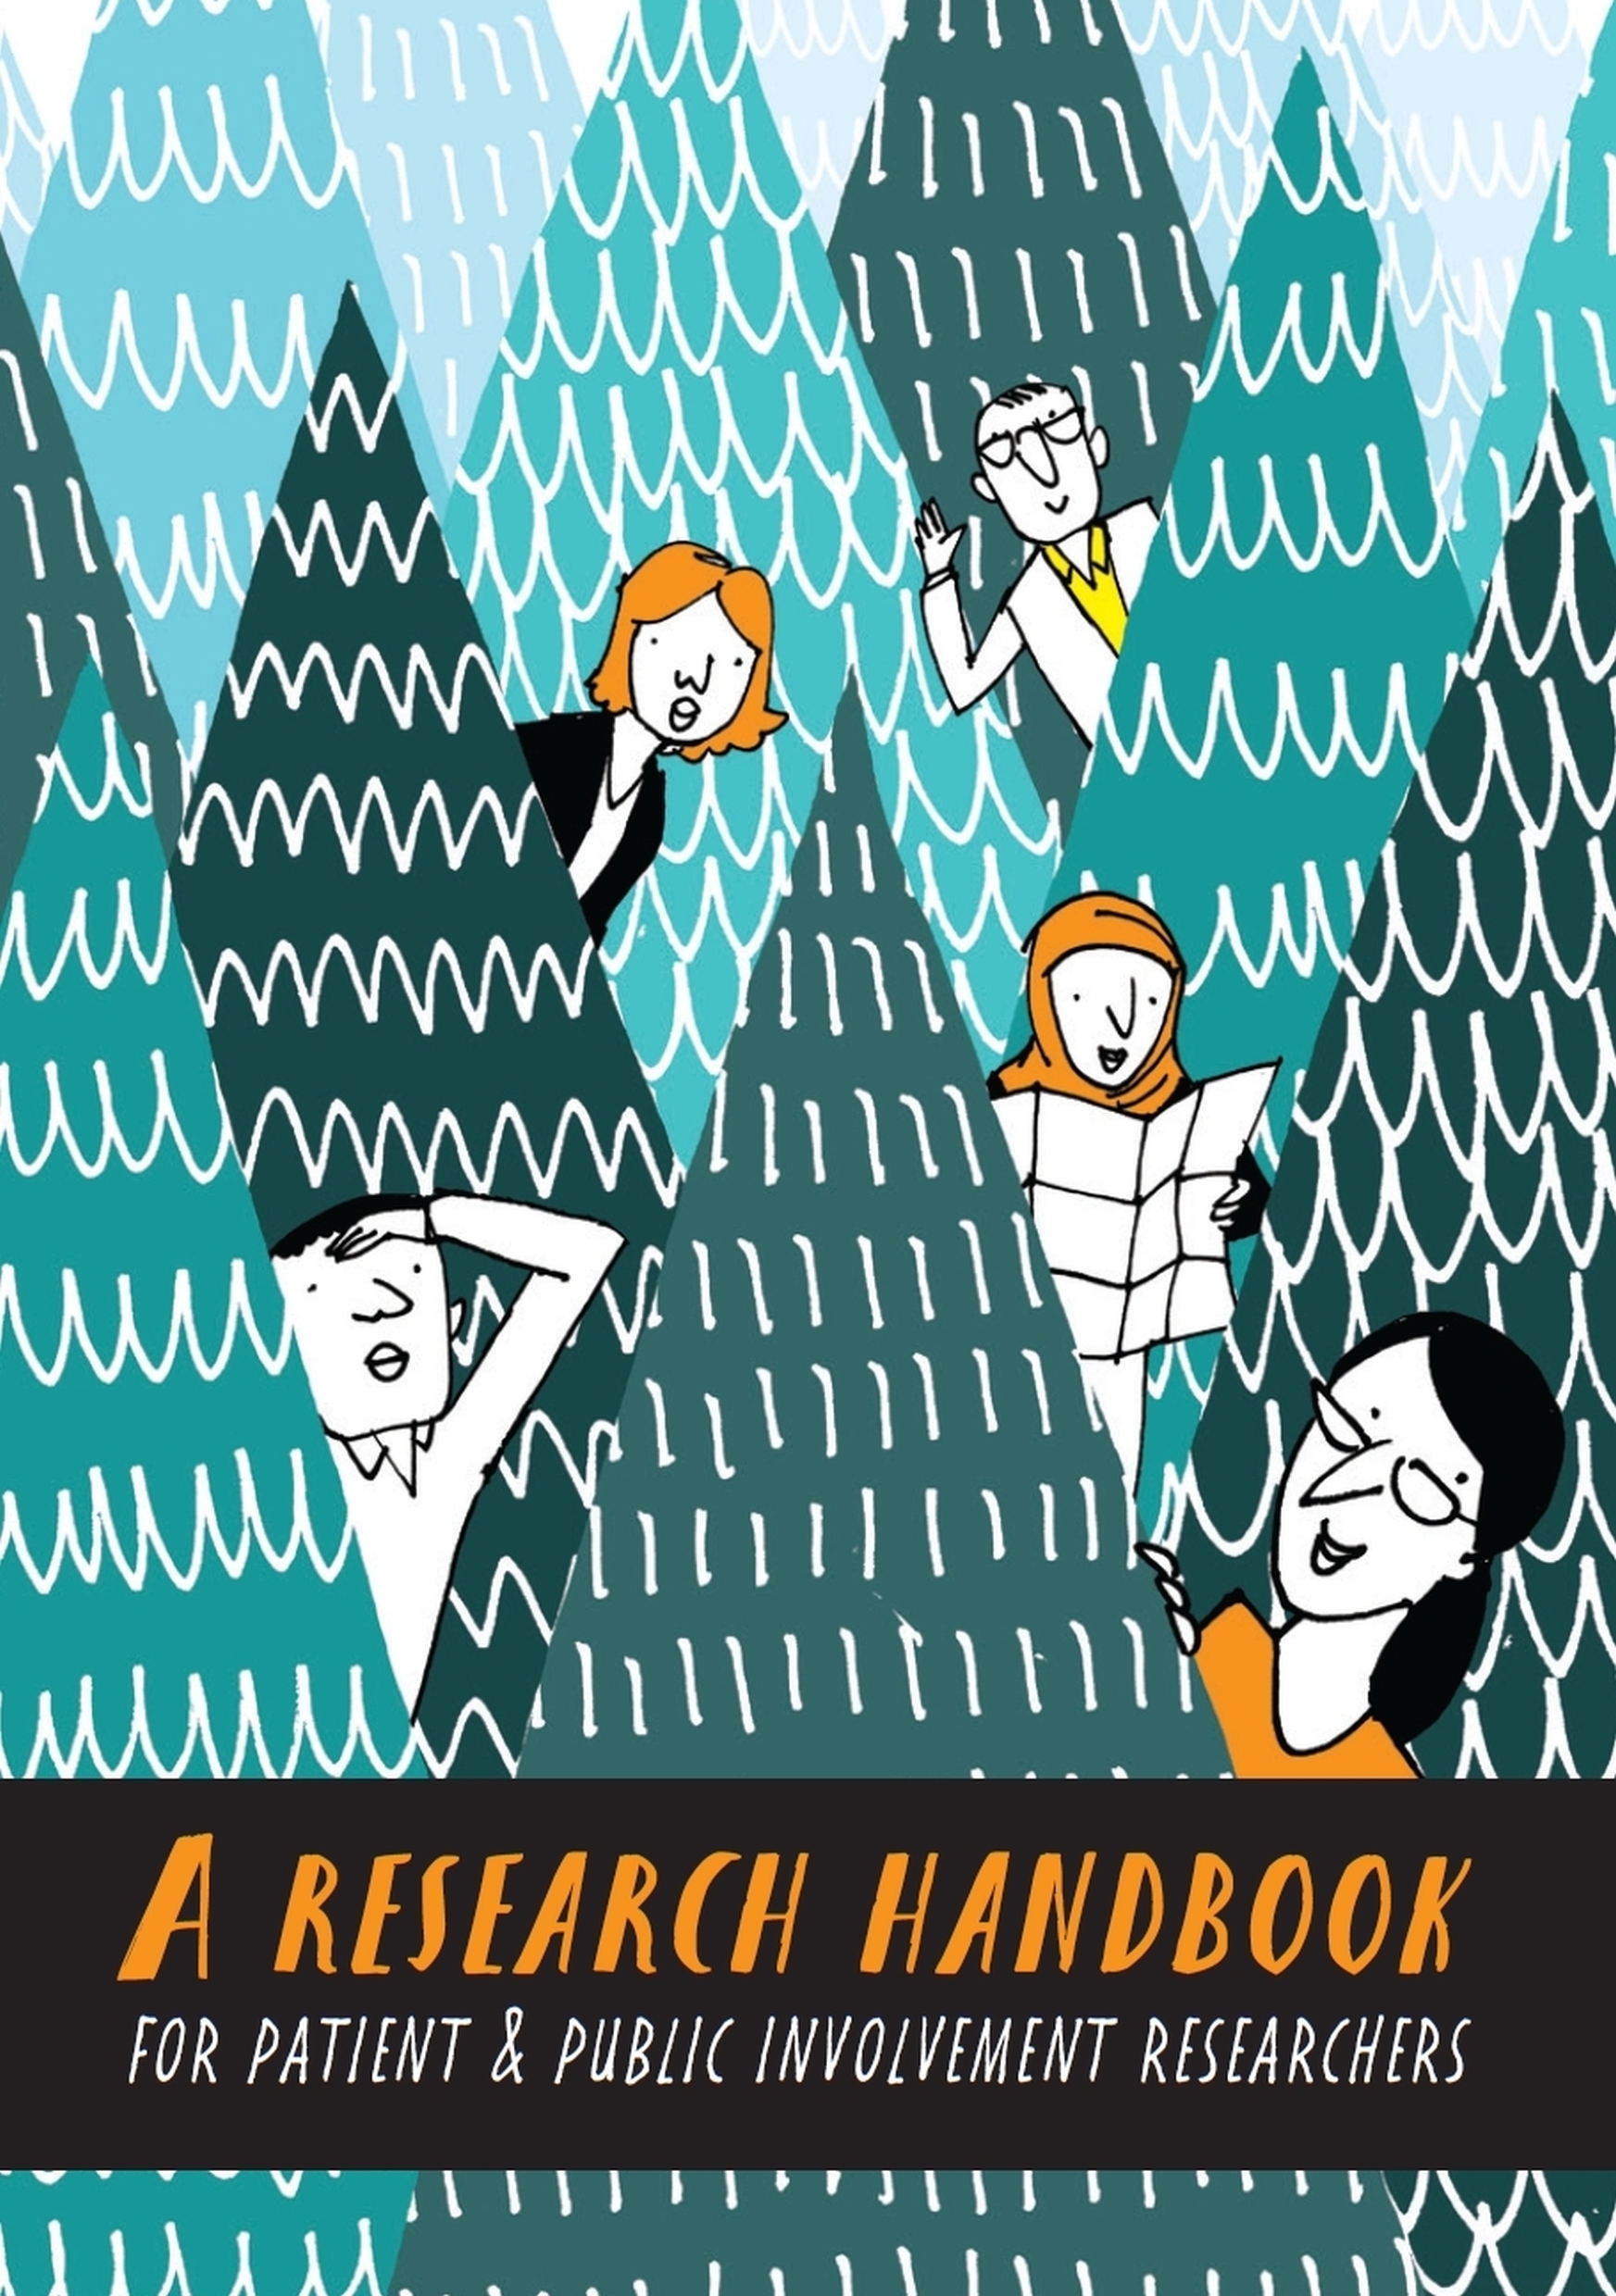 The front cover of a book, with the title 'A Research Handbook for Patient and Public Involvement Researchers'. The front cover illustration is a cartoon style picture of several fir trees with 5 people looking out from behind them.